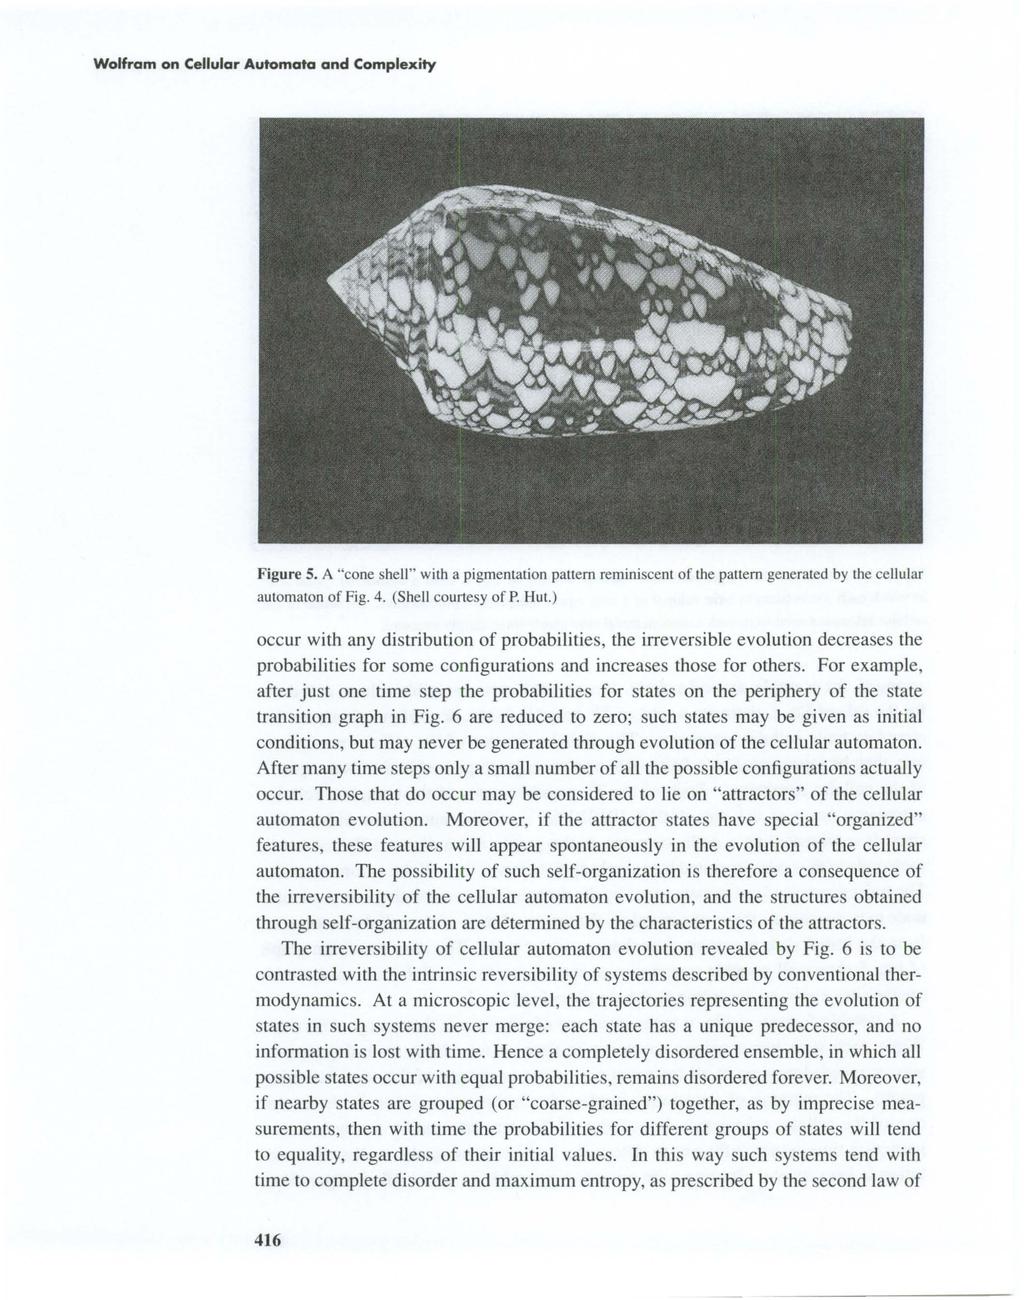 Wolfram on Cellular Automata and Complexity Figure 5. A "cone shell" with a pigmentation pattern reminiscent of the pattern generated by the cellular automaton of Fig. 4. (Shell courtesy of P. Hut.